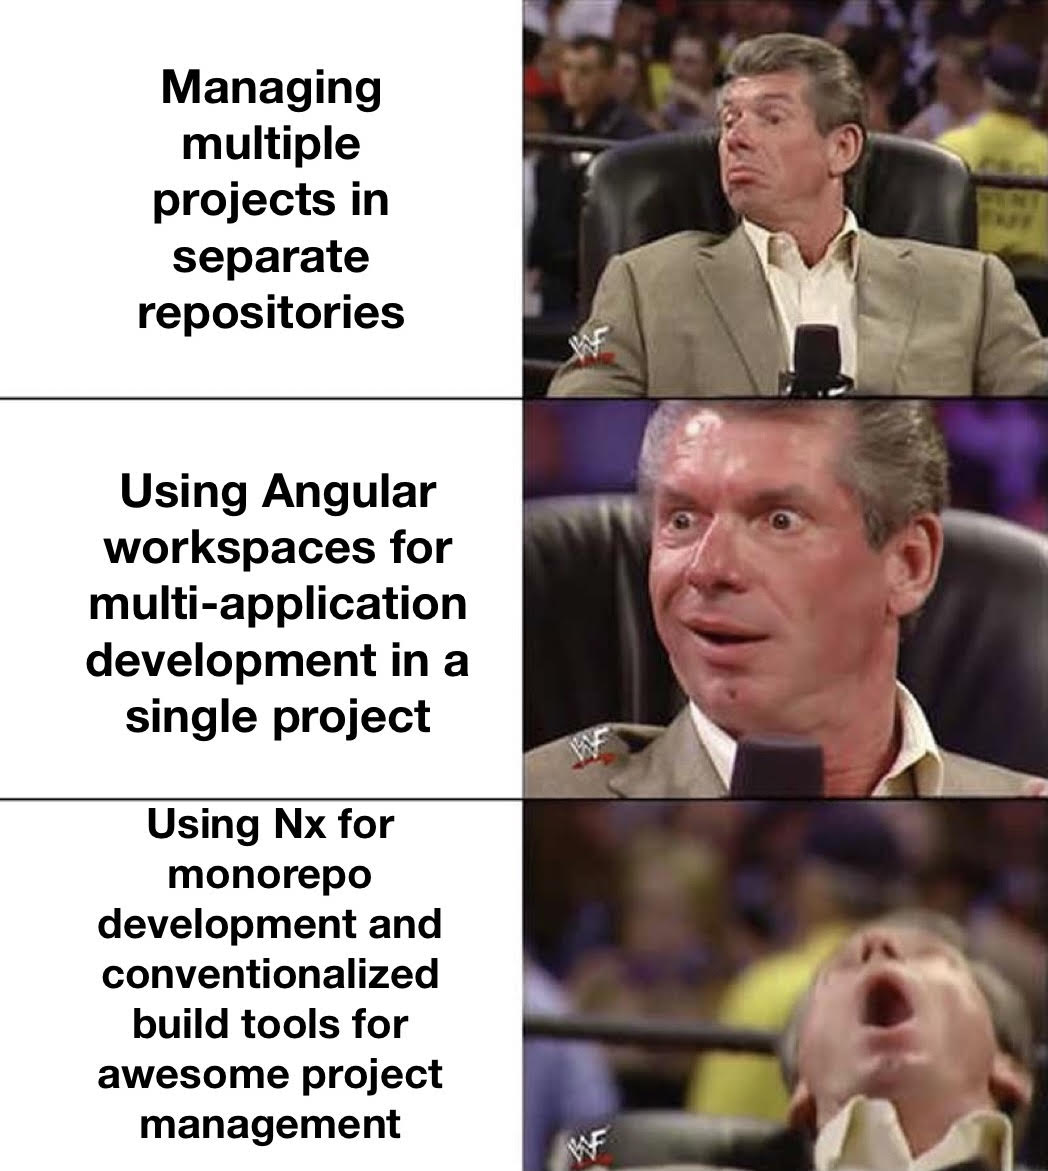 Hitchhiker's guide to Angular development with Nx blog meme